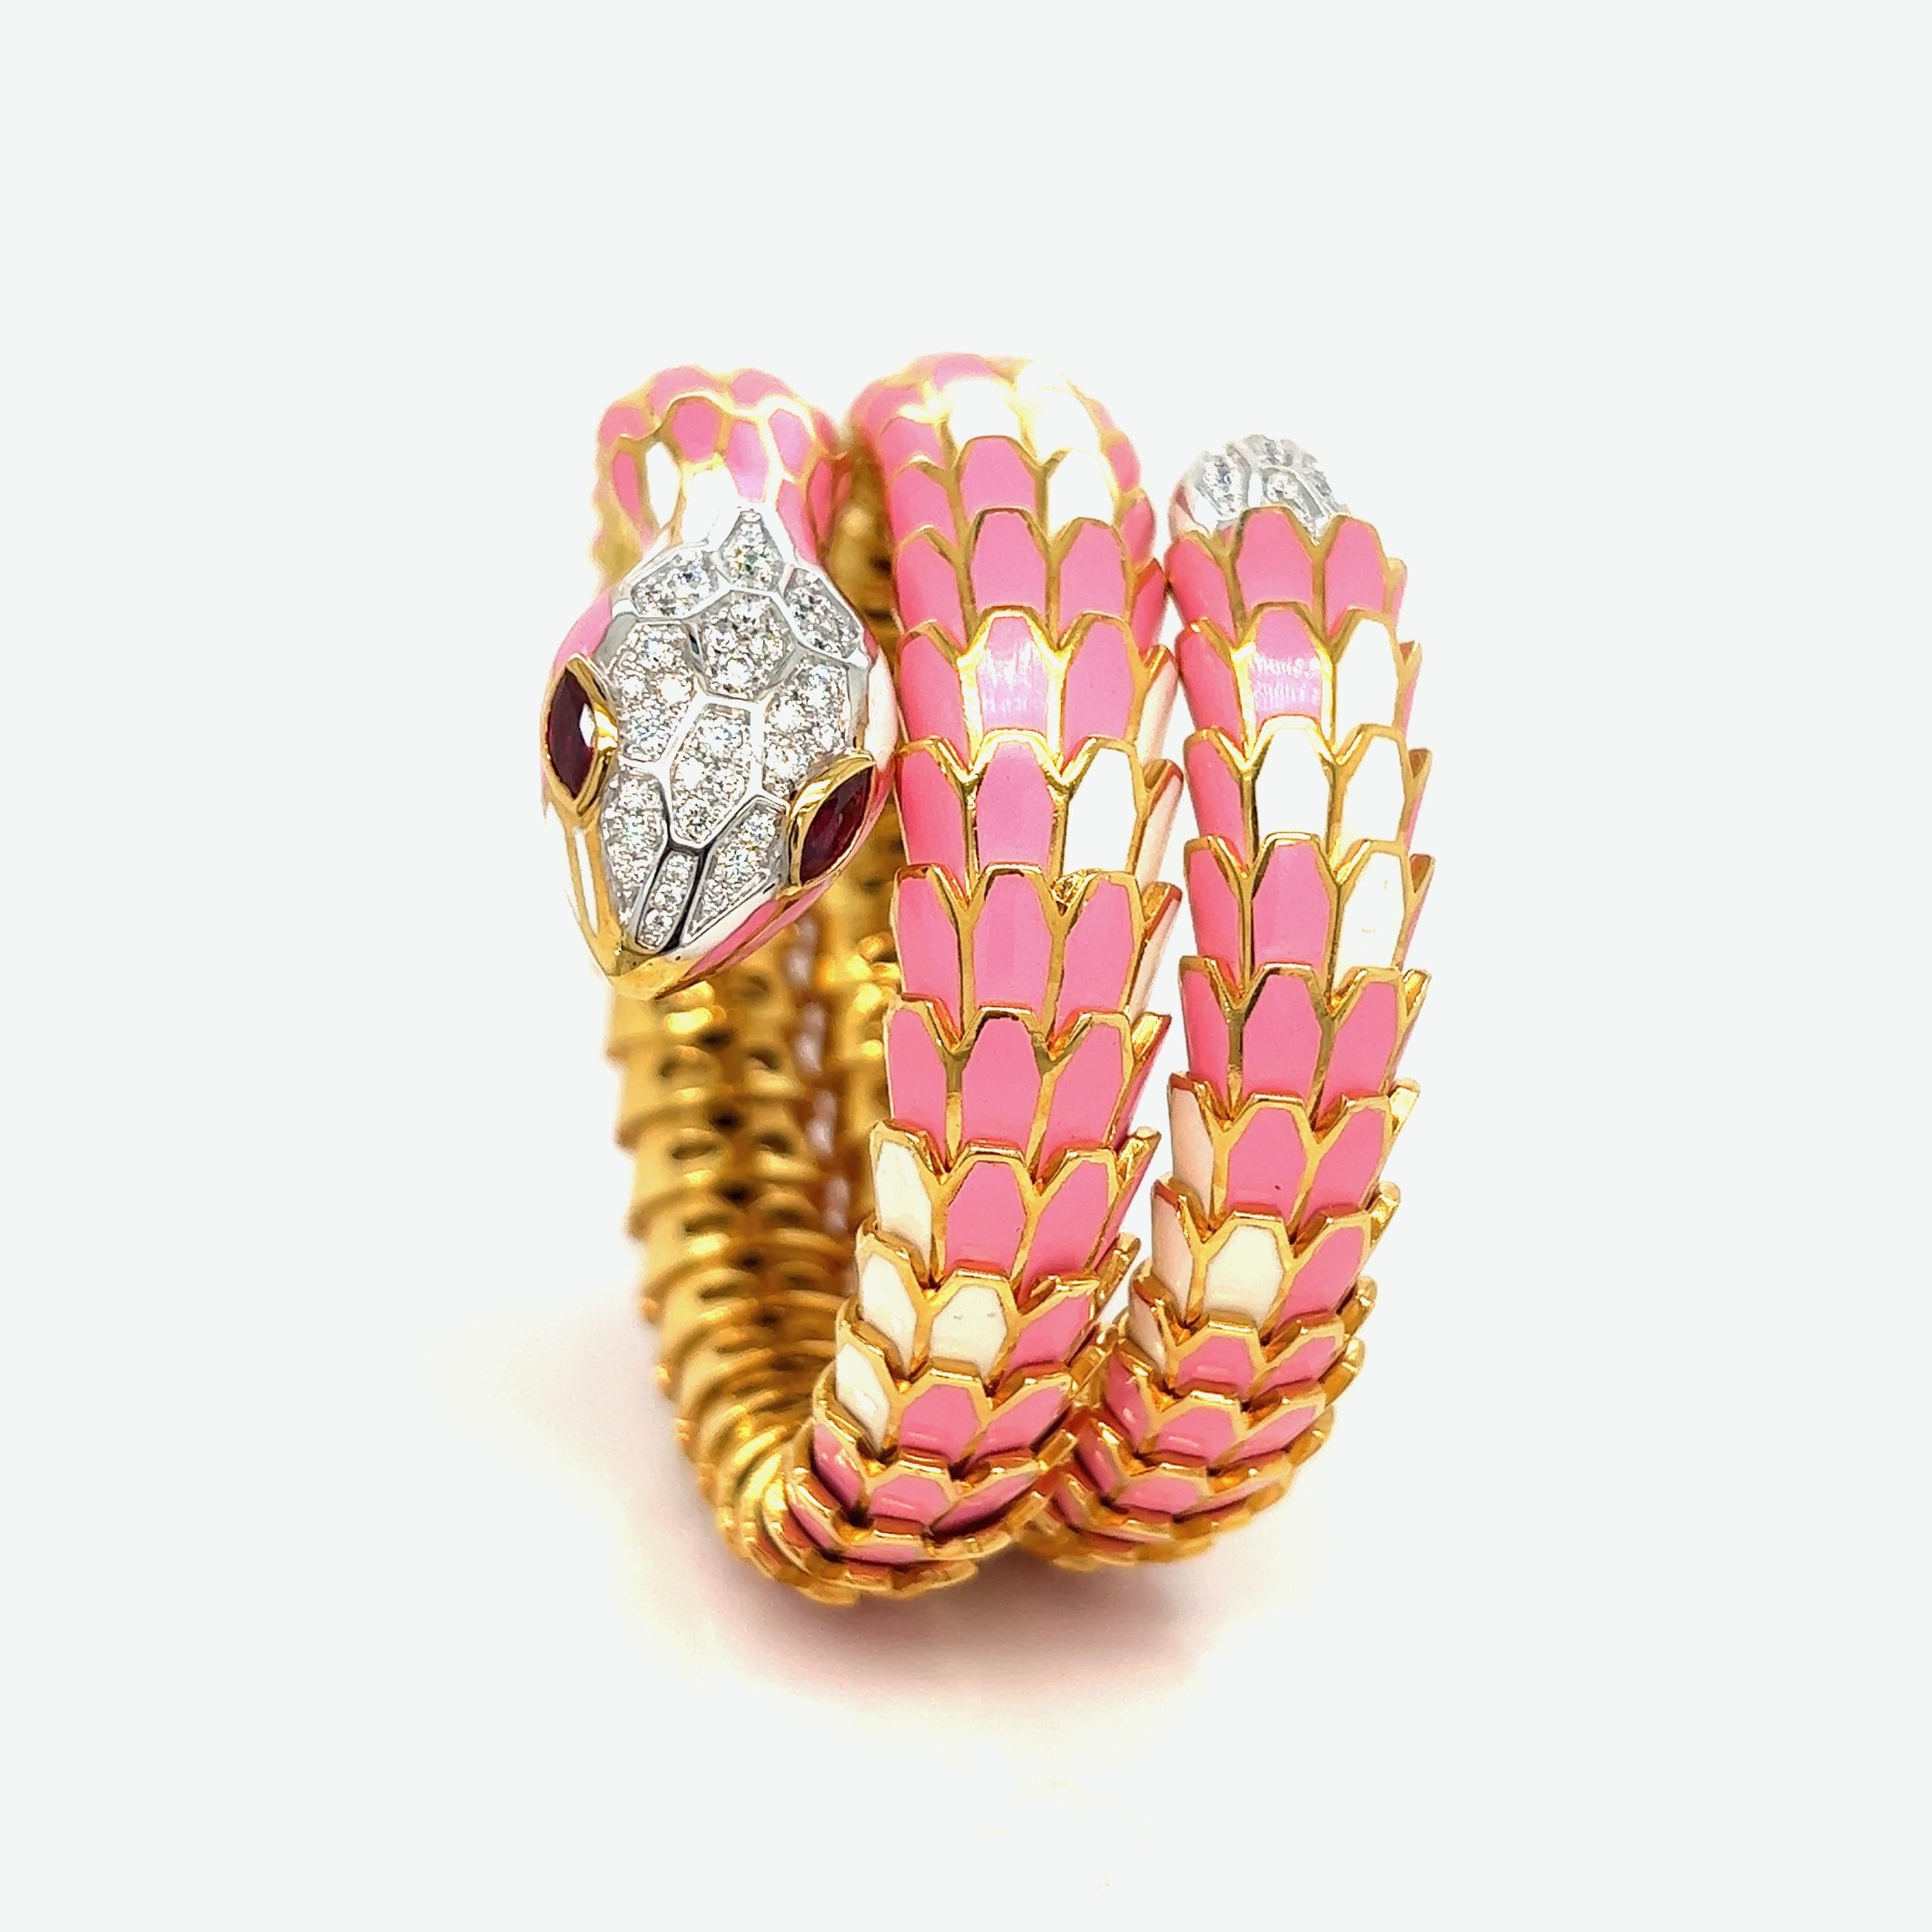 Light pink and white enamel snake wrap bracelet 

Marquise-shaped rubies of 0.56 carat, round brilliant-cut diamonds of 1.10 carat, 18 karat white gold, sterling silver with a tone of yellow gold; marked 750, 925, D. 1.10, R. 0.56

Inner